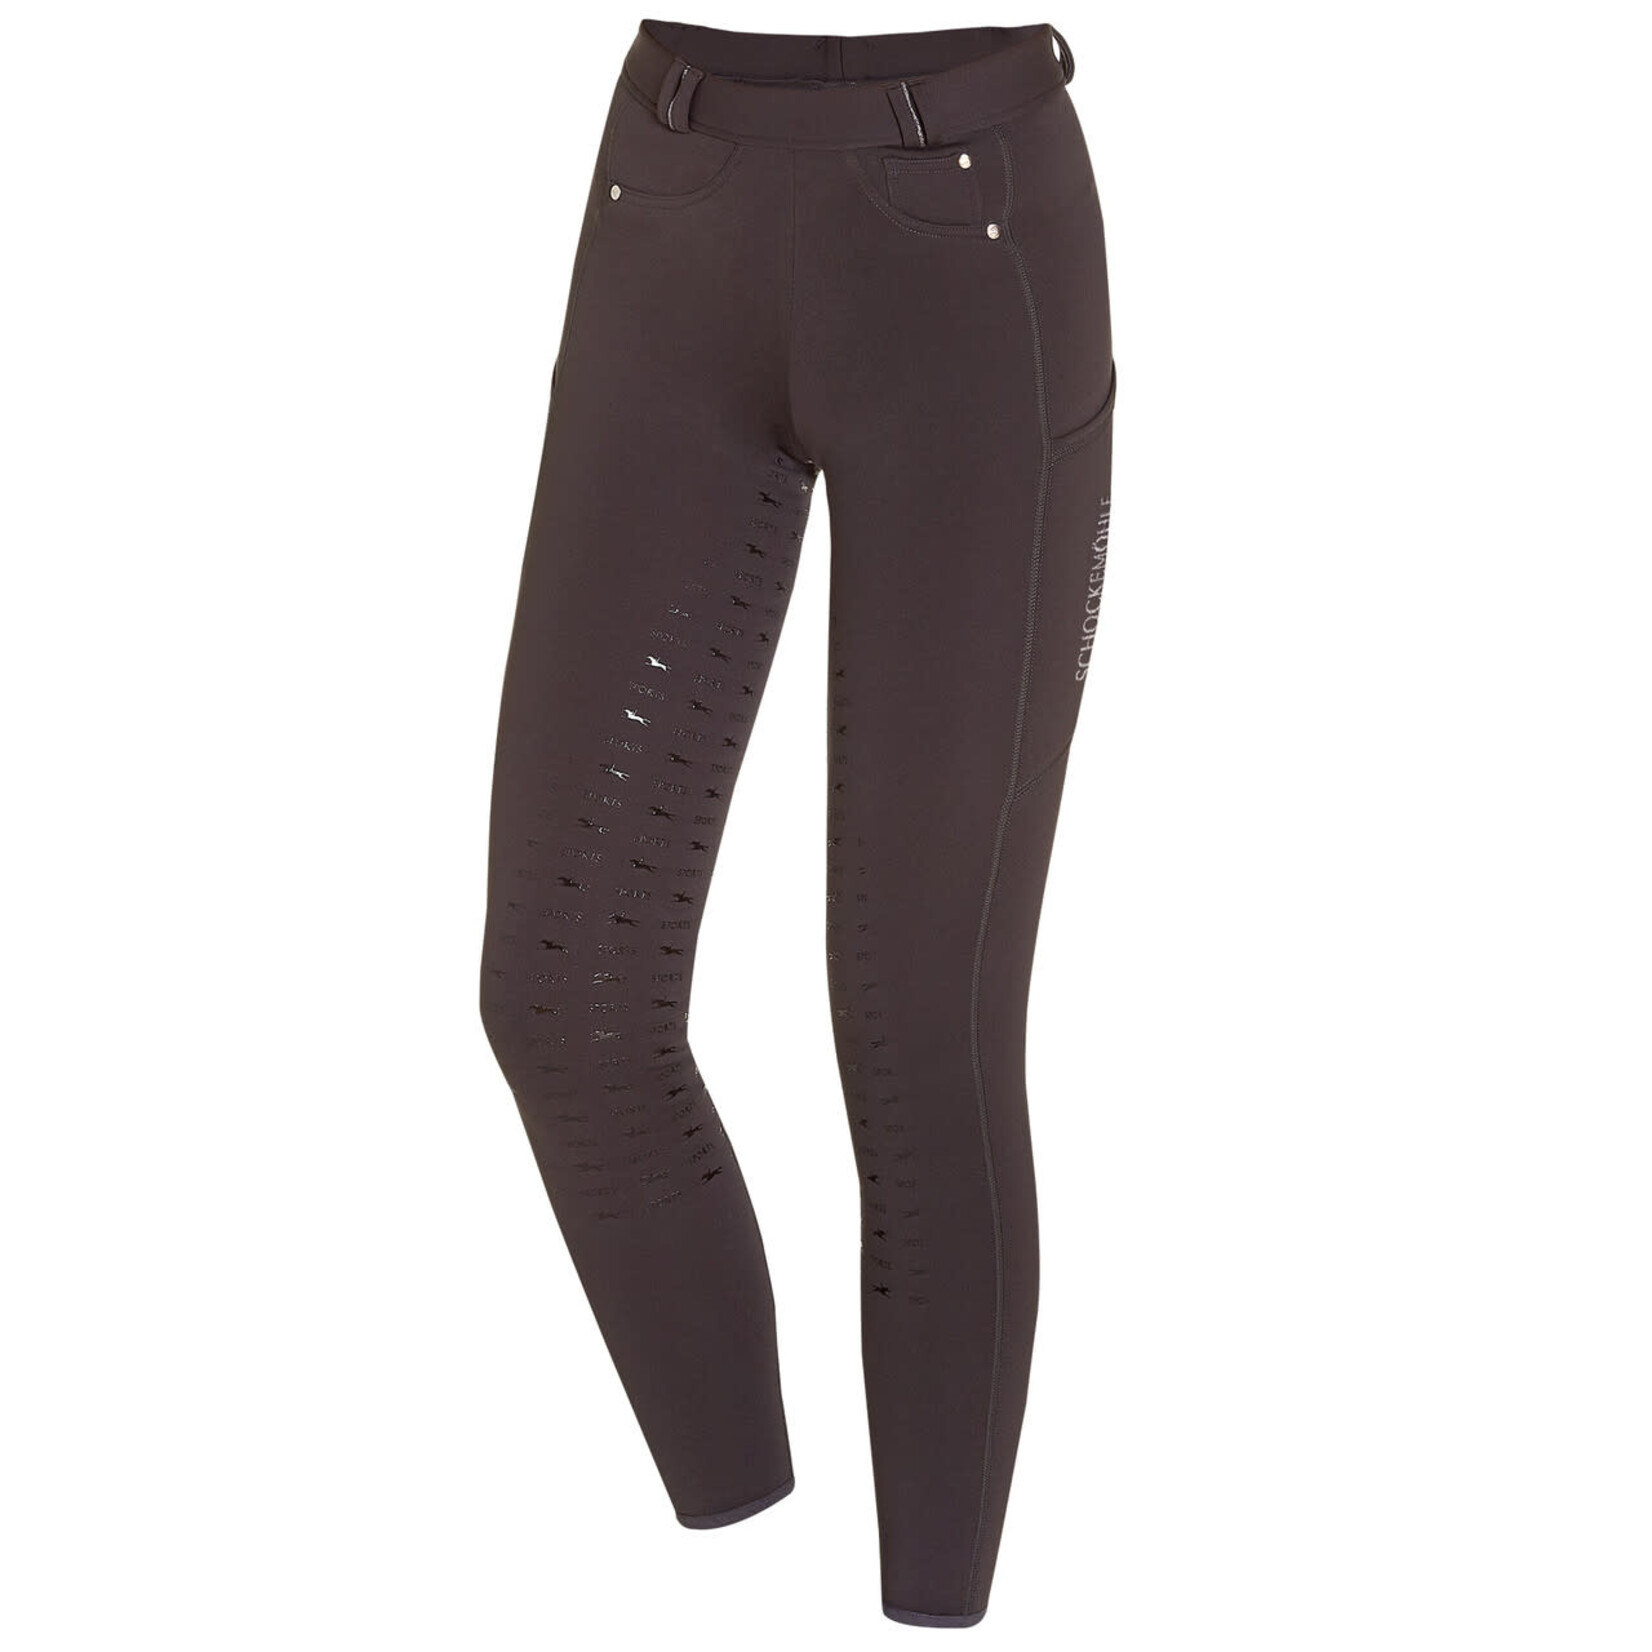 Buy Schockemöhle Cooling Fullgrip Tights for Women